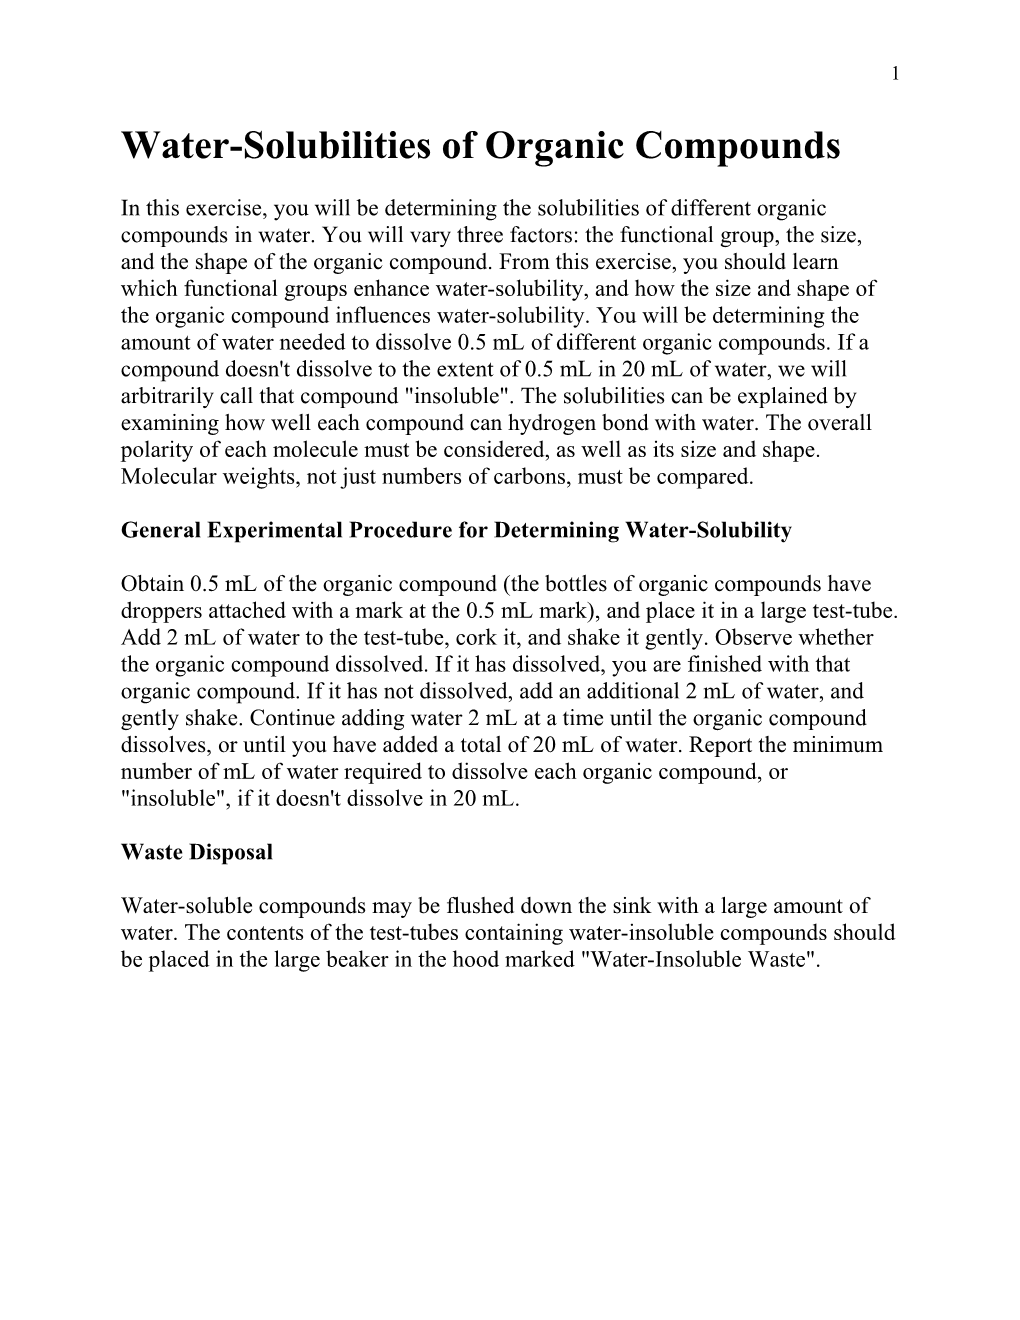 Water-Solubilities of Organic Compounds